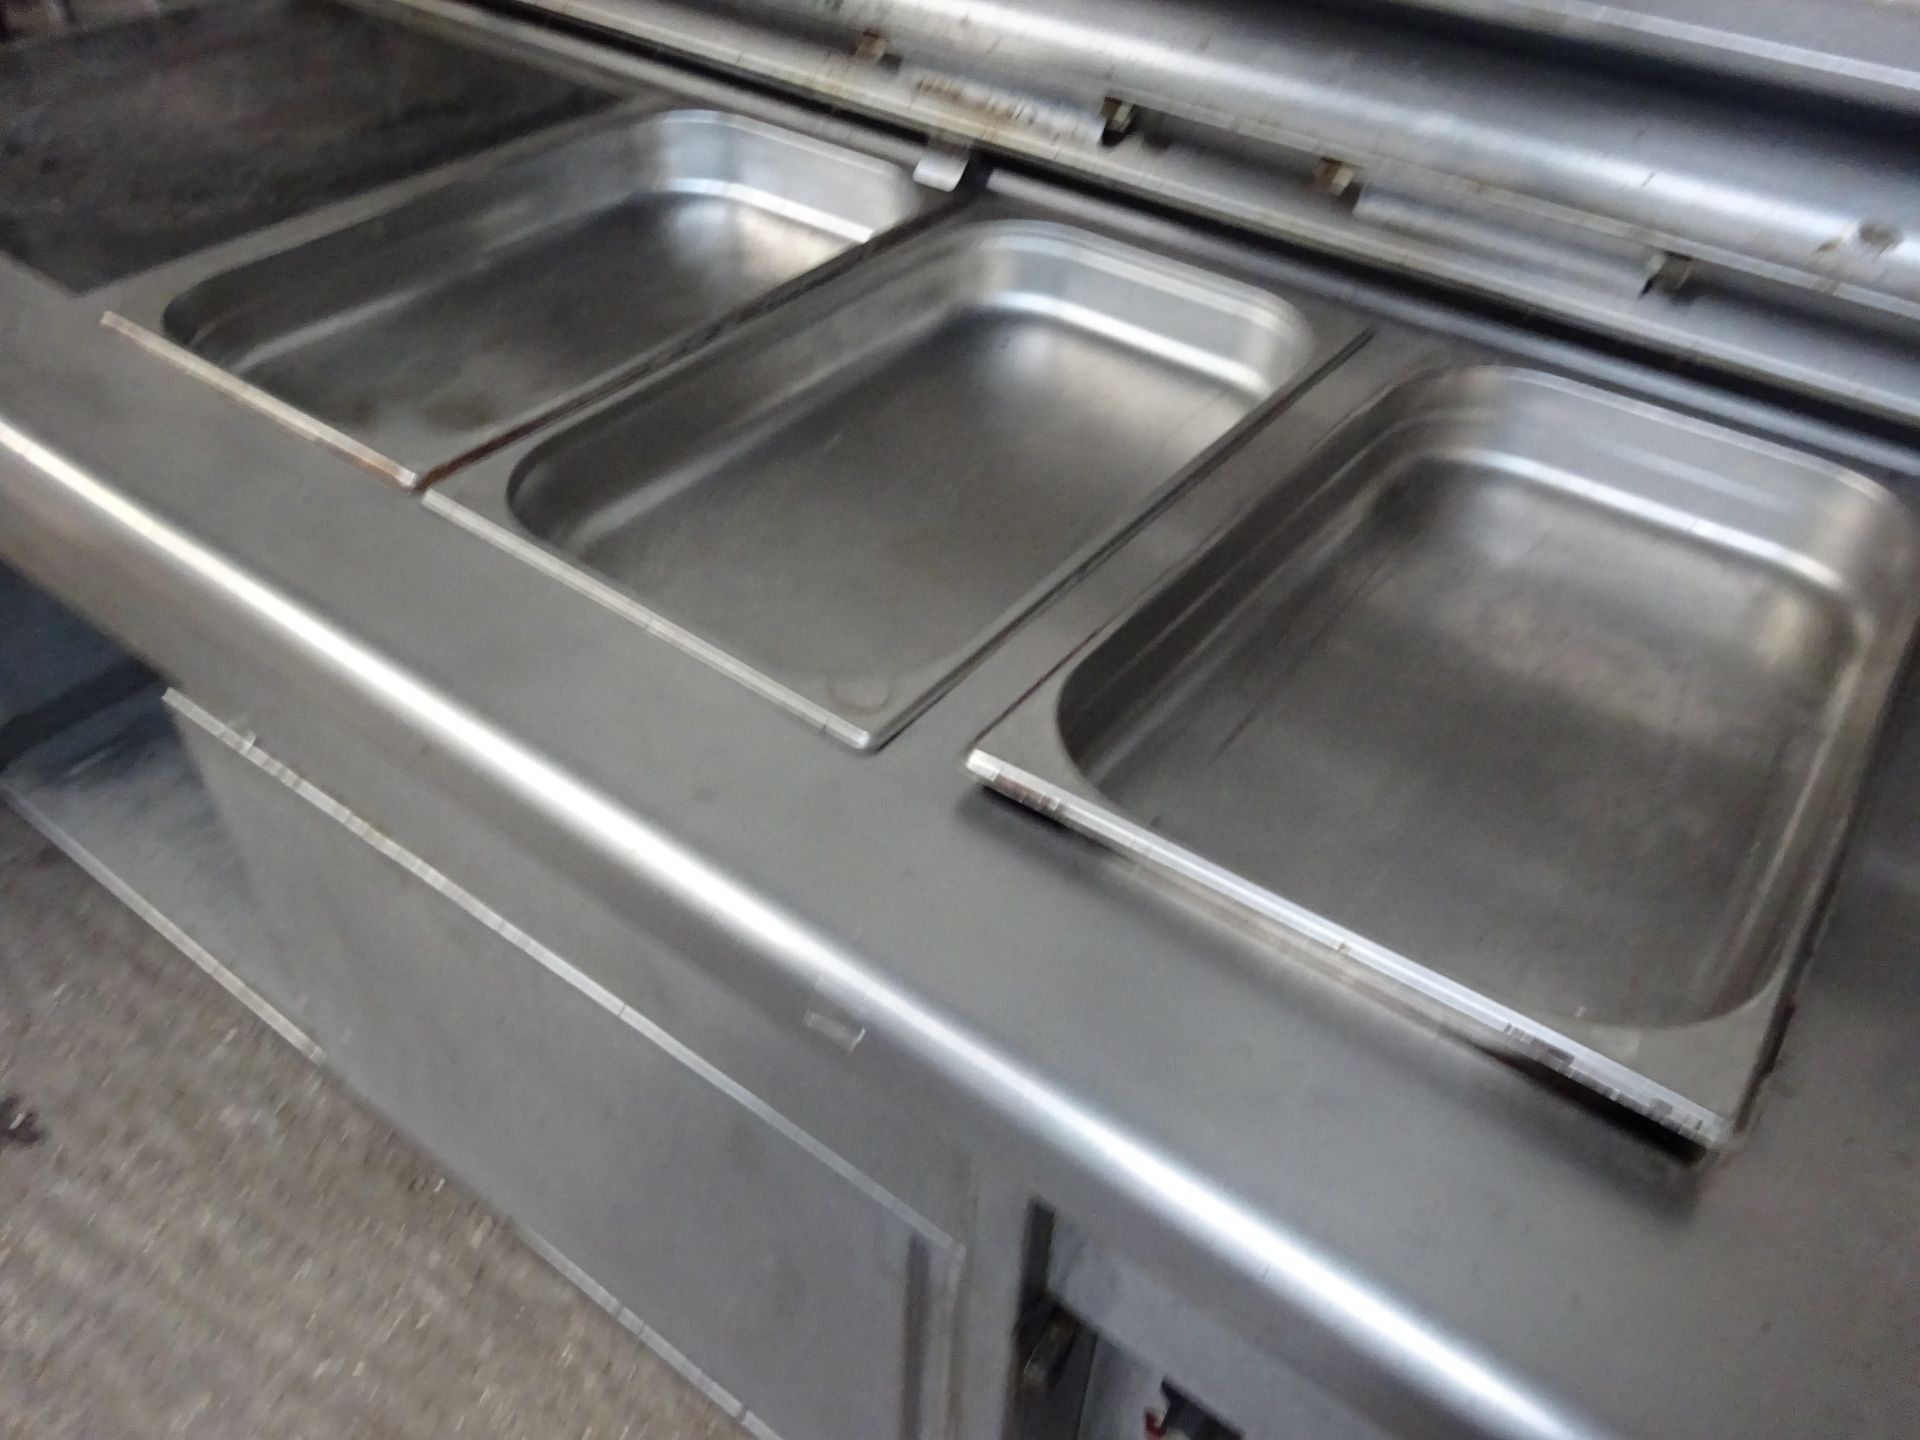 Bain marie hot cupboard with sliding doors. - Image 3 of 4